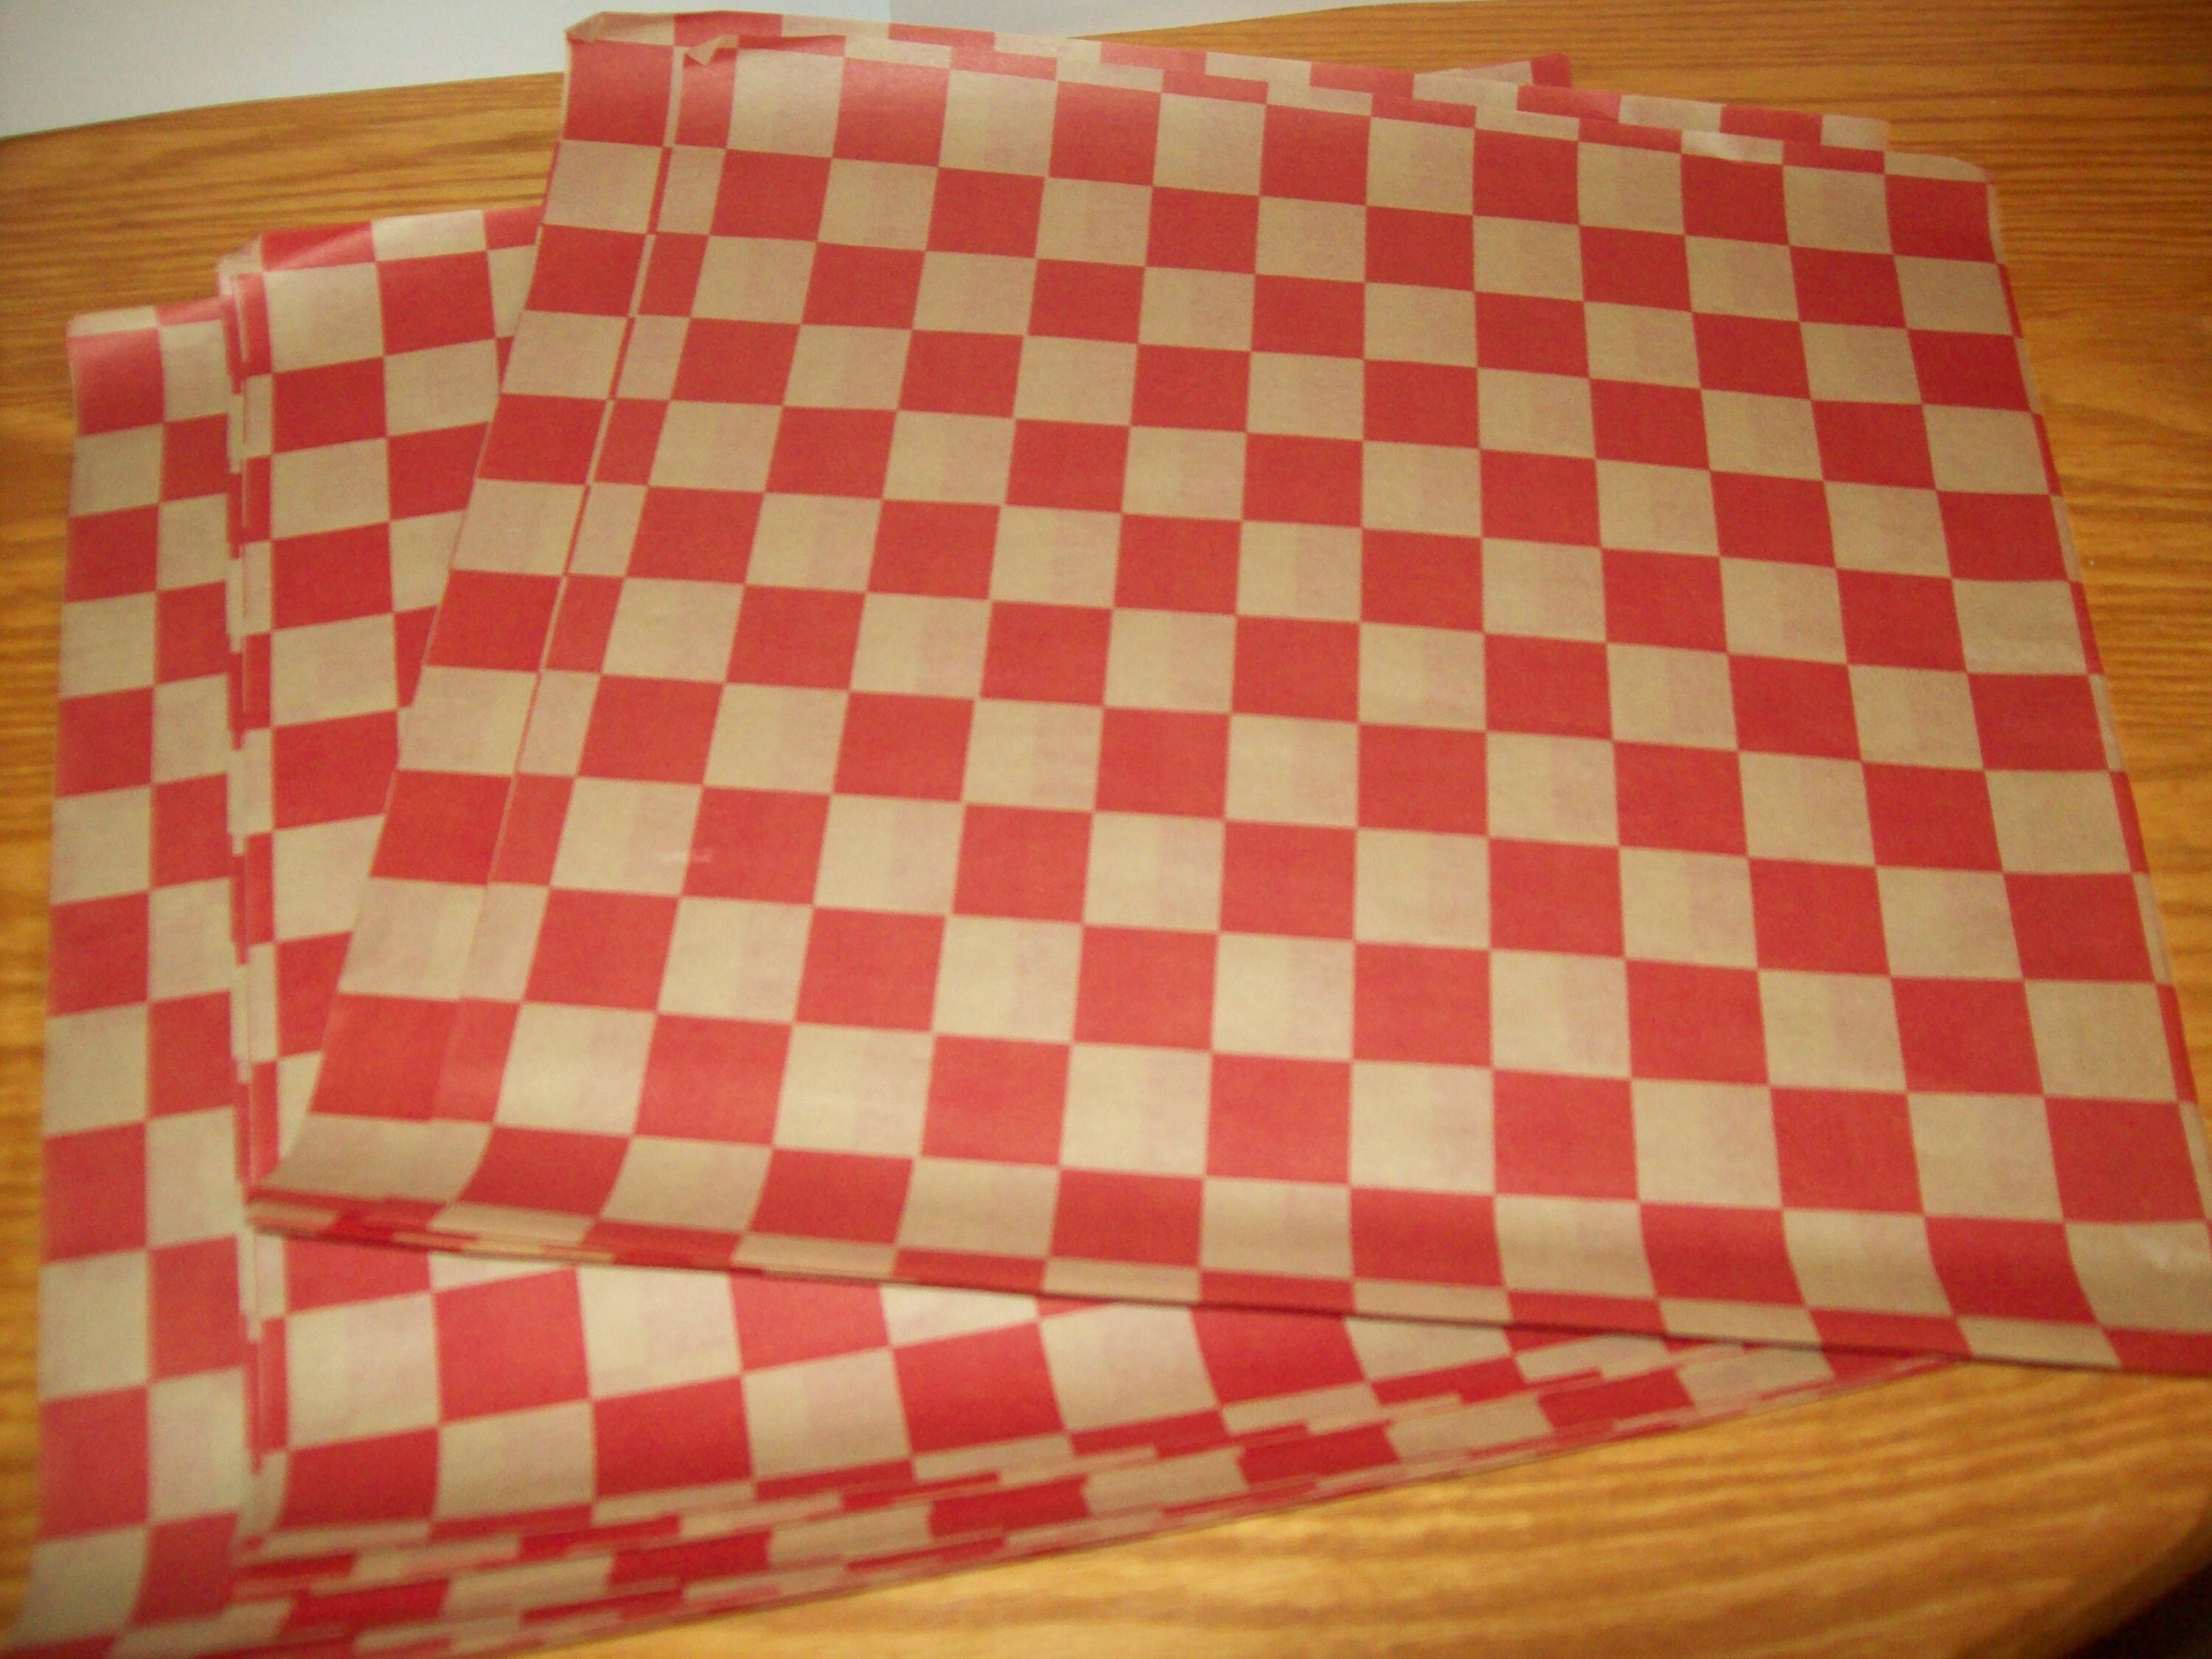 240 Sheets Checkered Dry Waxed Deli Paper Sheets Grease Resistant Food  Basket Liners Deli Wrap Wax Paper Sheets for Sandwiches - AliExpress